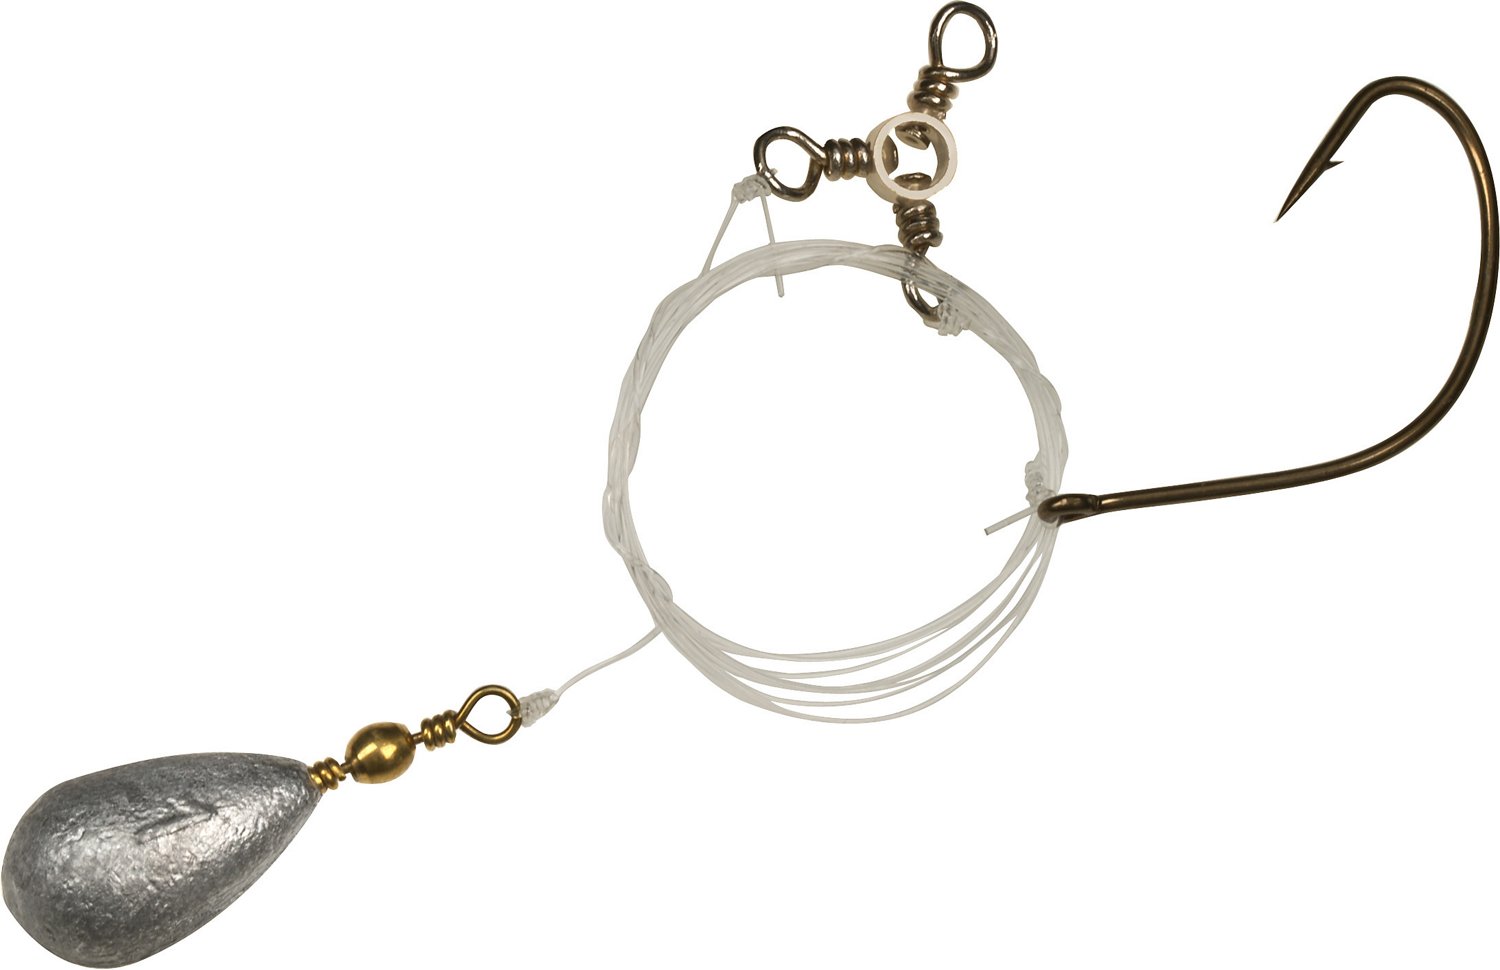 Are you using circle hooks?, Outdoors